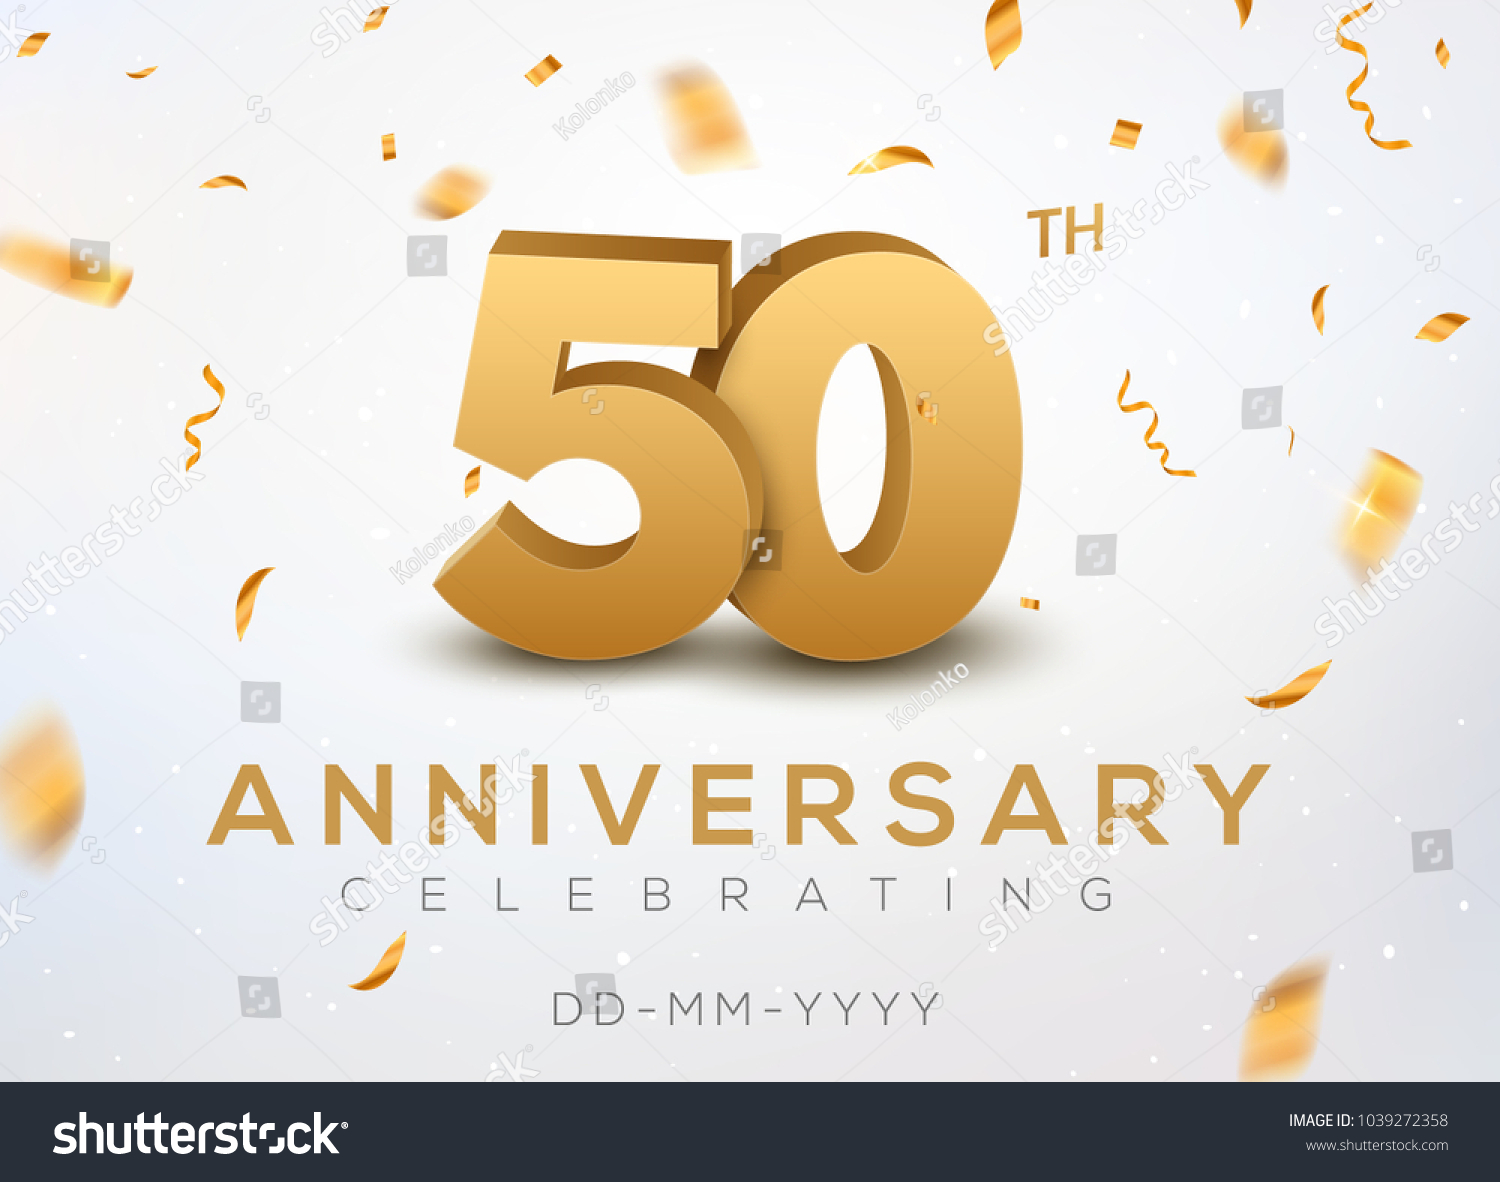 SVG of 50 Anniversary gold numbers with golden confetti. Celebration 50th anniversary event party template. svg